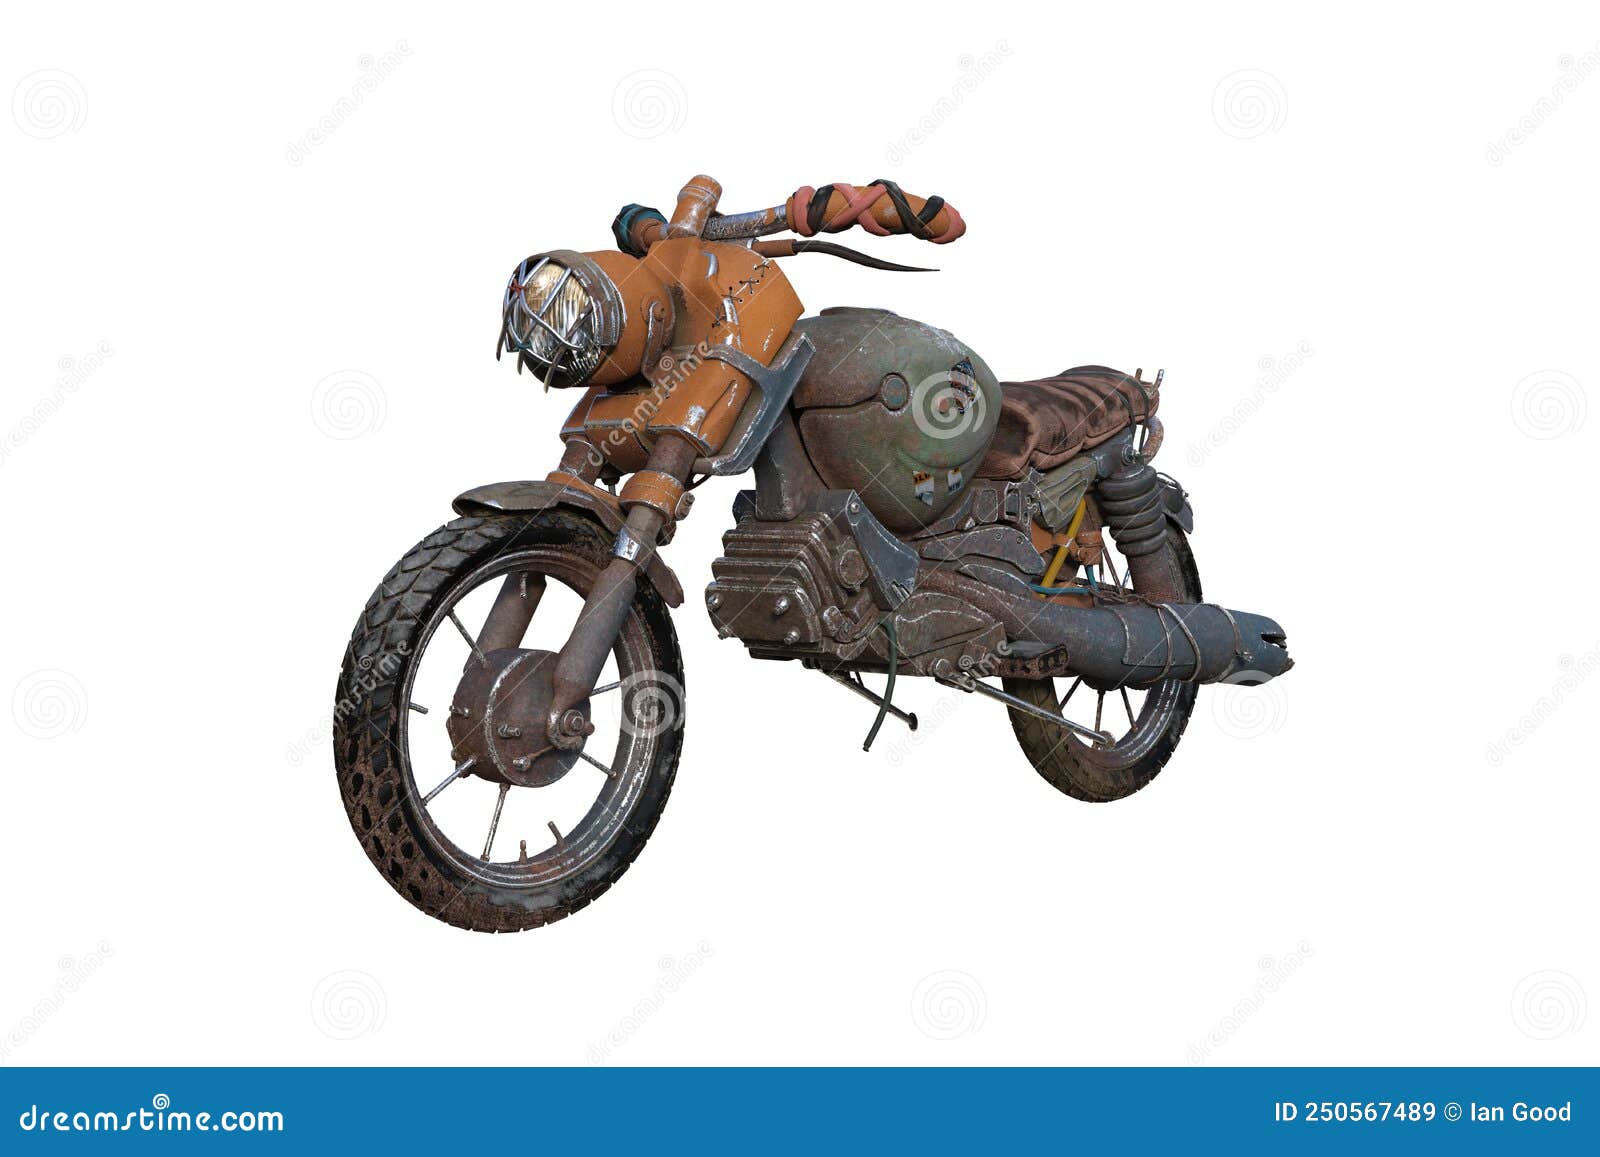 fantasy post apocalyptic motorcycle made of scrap parts. 3d rendering  on white background